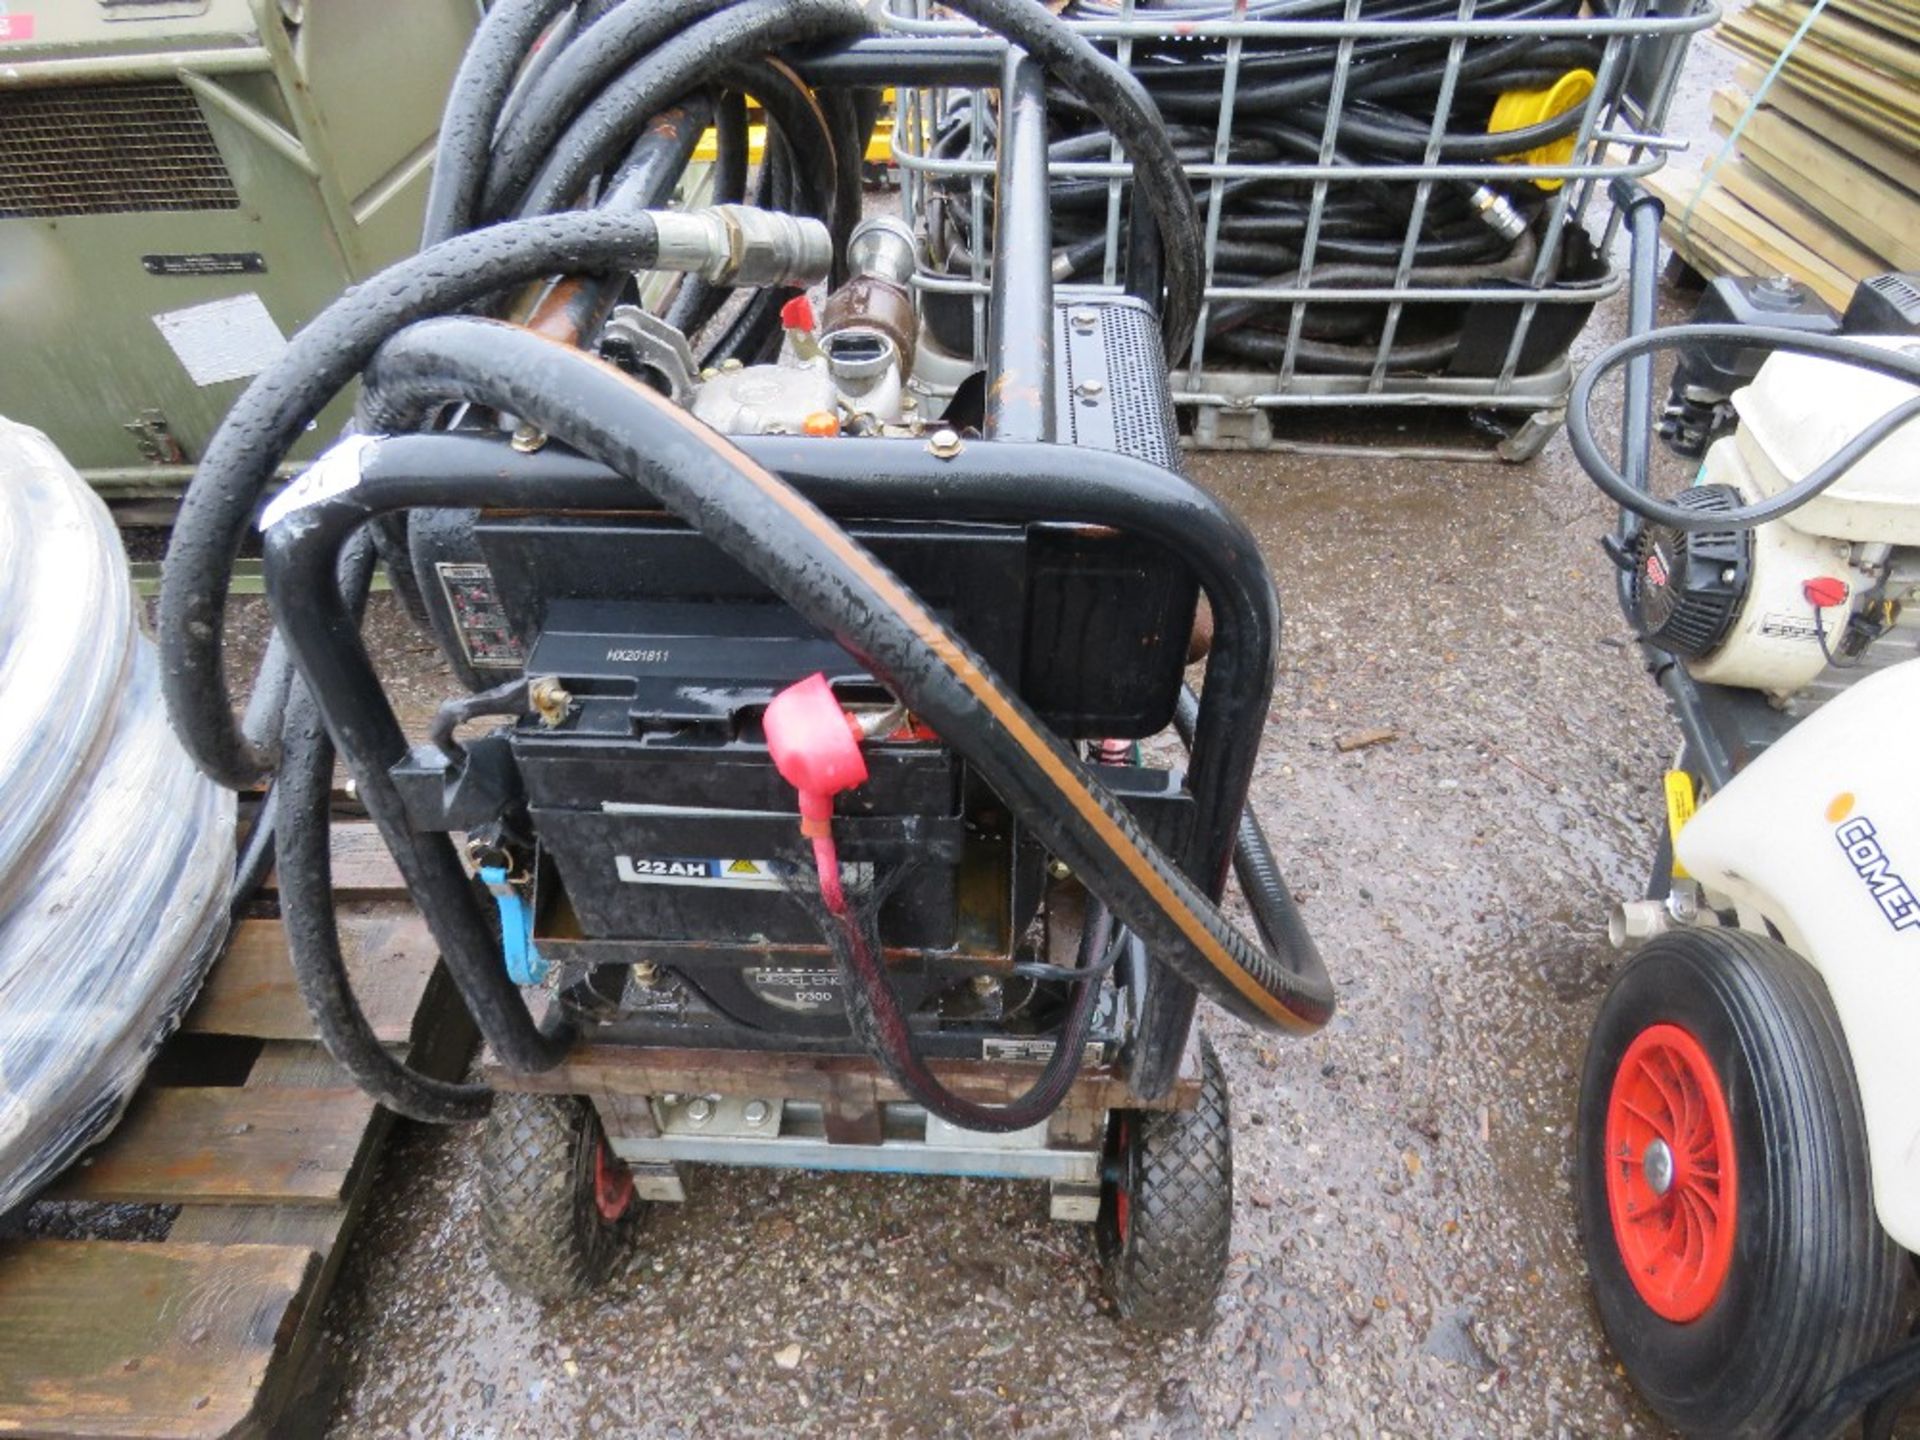 DIESEL ENGINED FUEL TRANSFER PUMP WITH HOSE. SOURCED FROM COMPANY LIQUIDATION. THIS LOT IS SOLD - Image 3 of 6